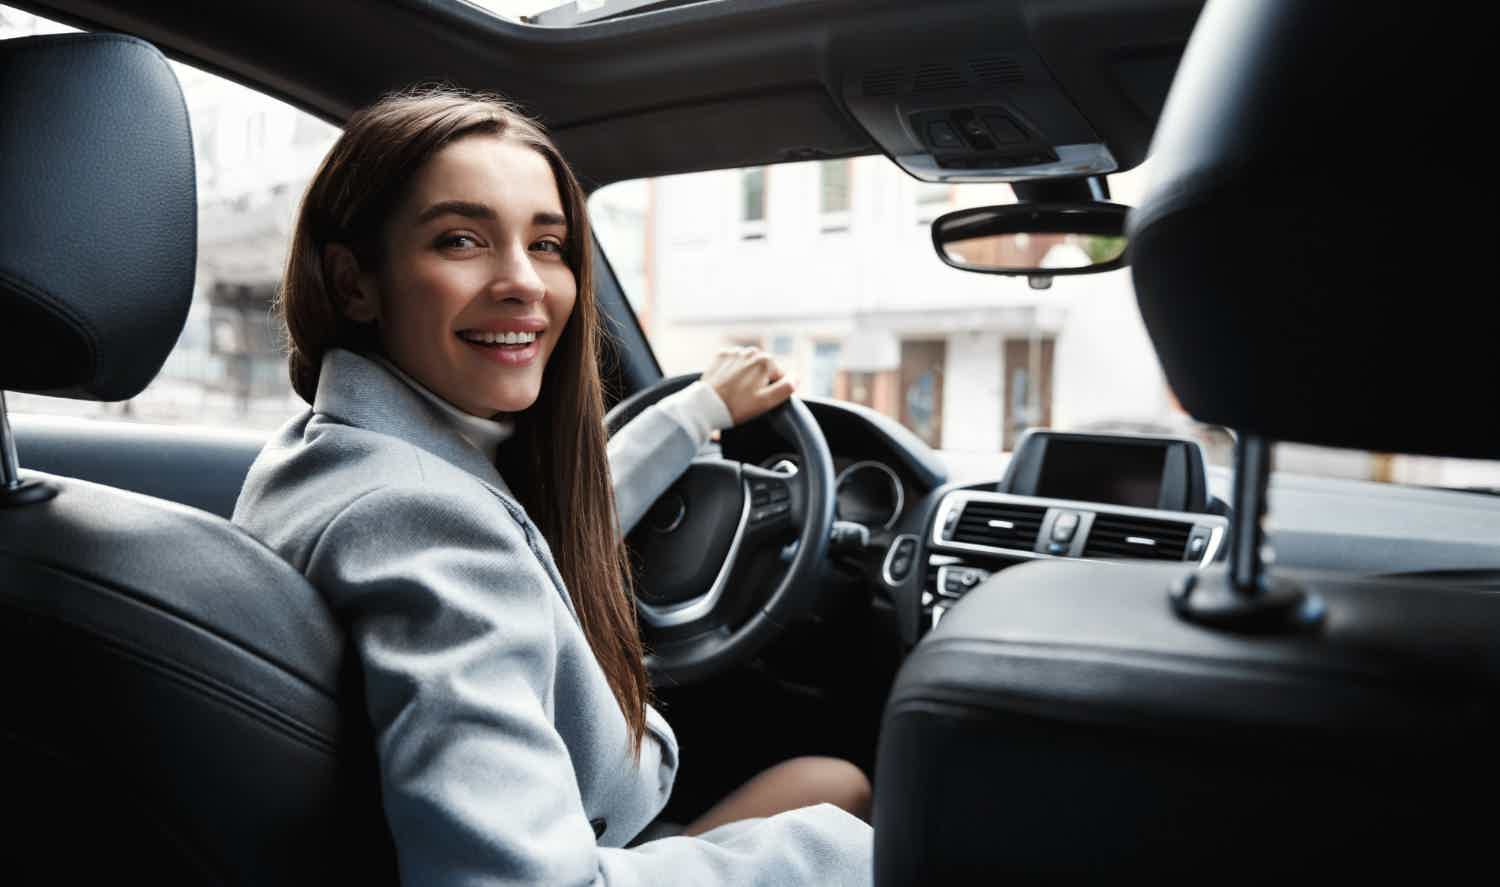 Get the auto loan you need to buy the car you want. Source: Freepik.